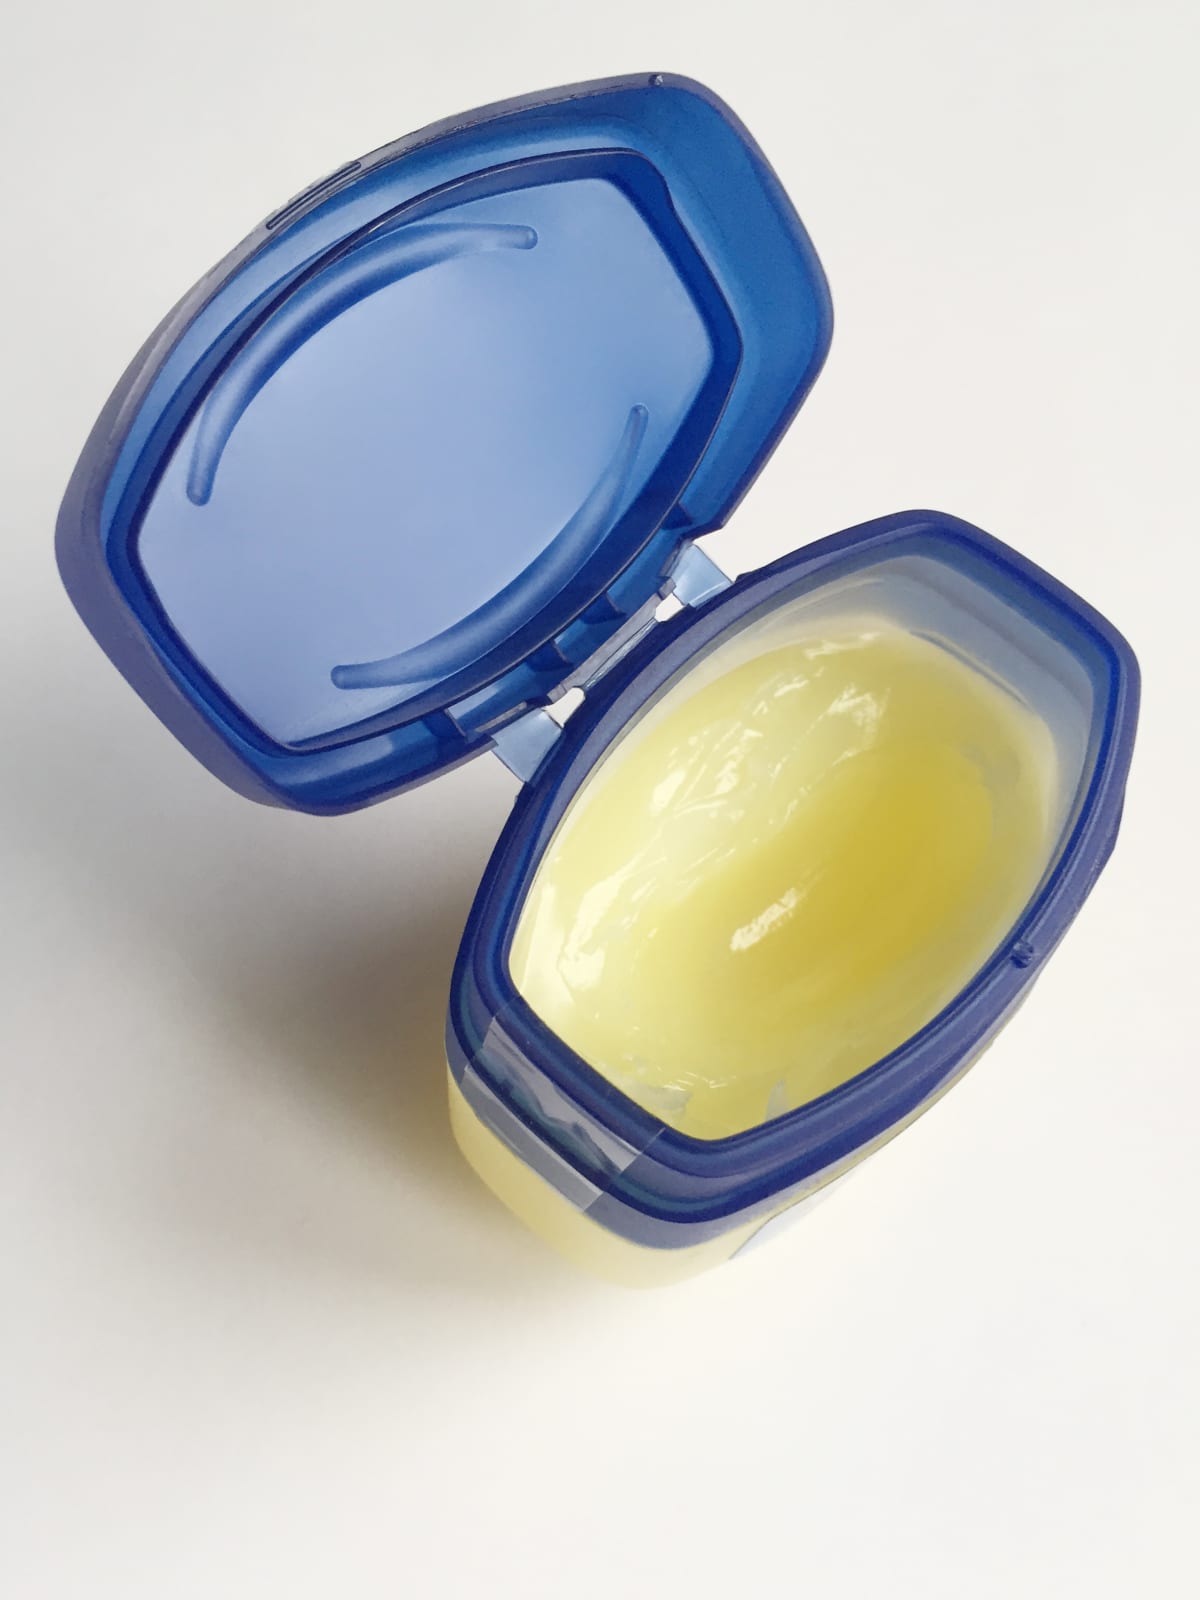 An opened box of vaseline petroleum jelly